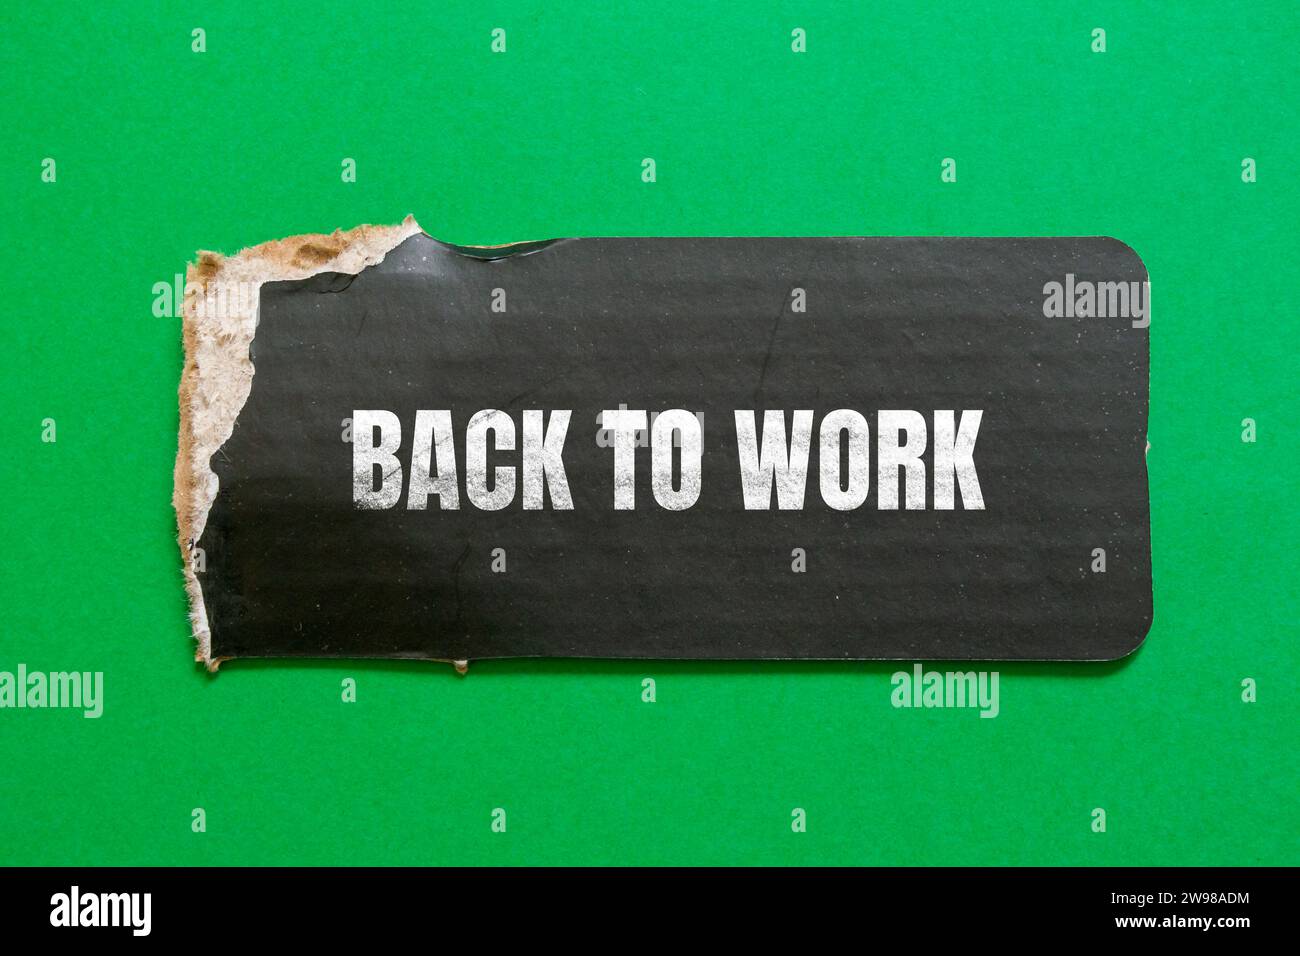 Back to work lettering on ripped paper. Business concept photo. Stock Photo